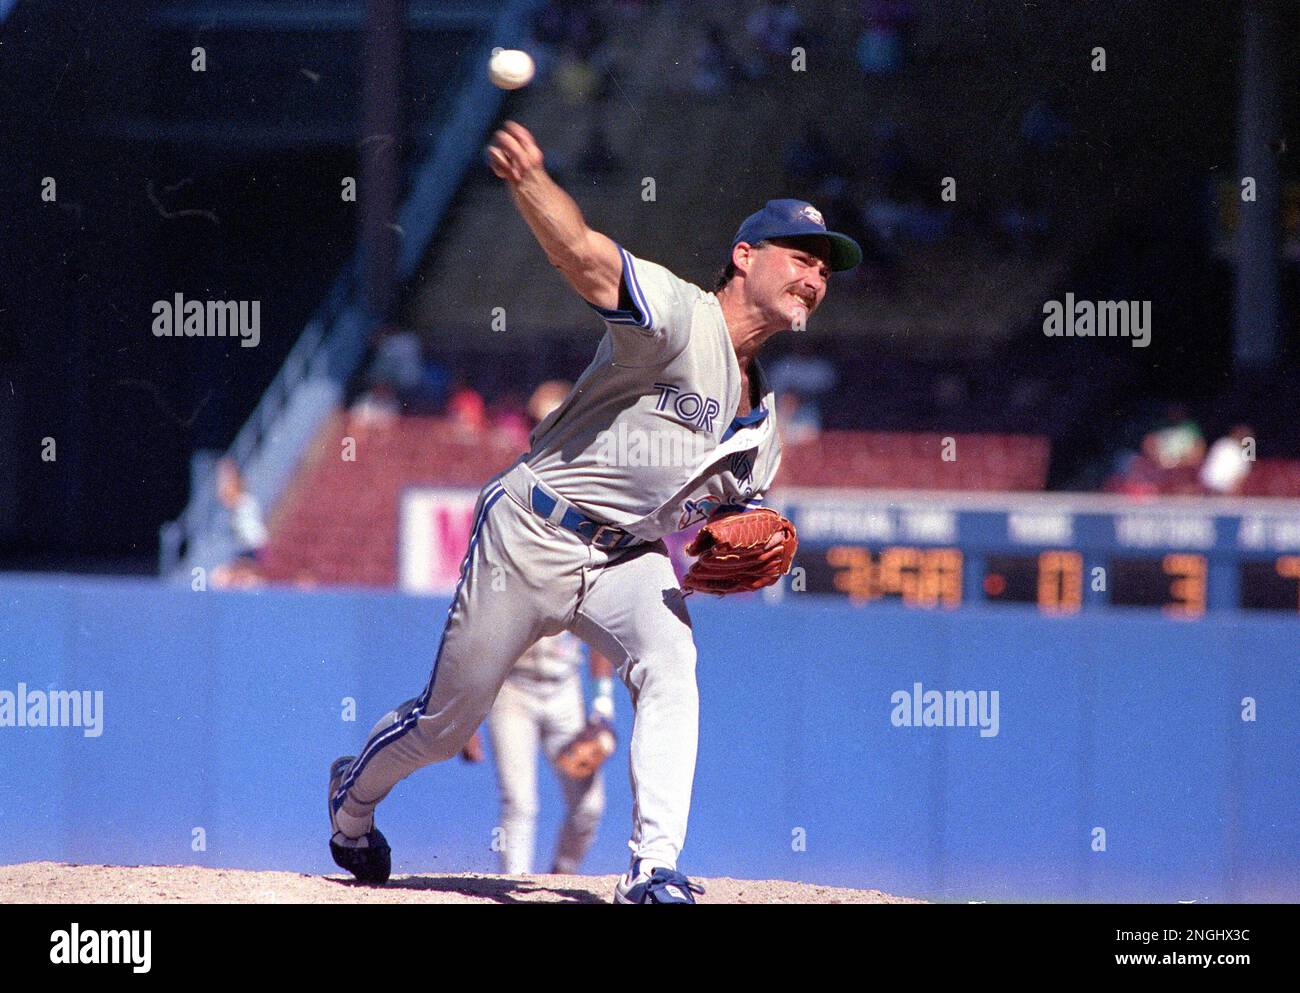 Toronto Blue Jays pitcher Dave Stieb sends a ball to the plate in